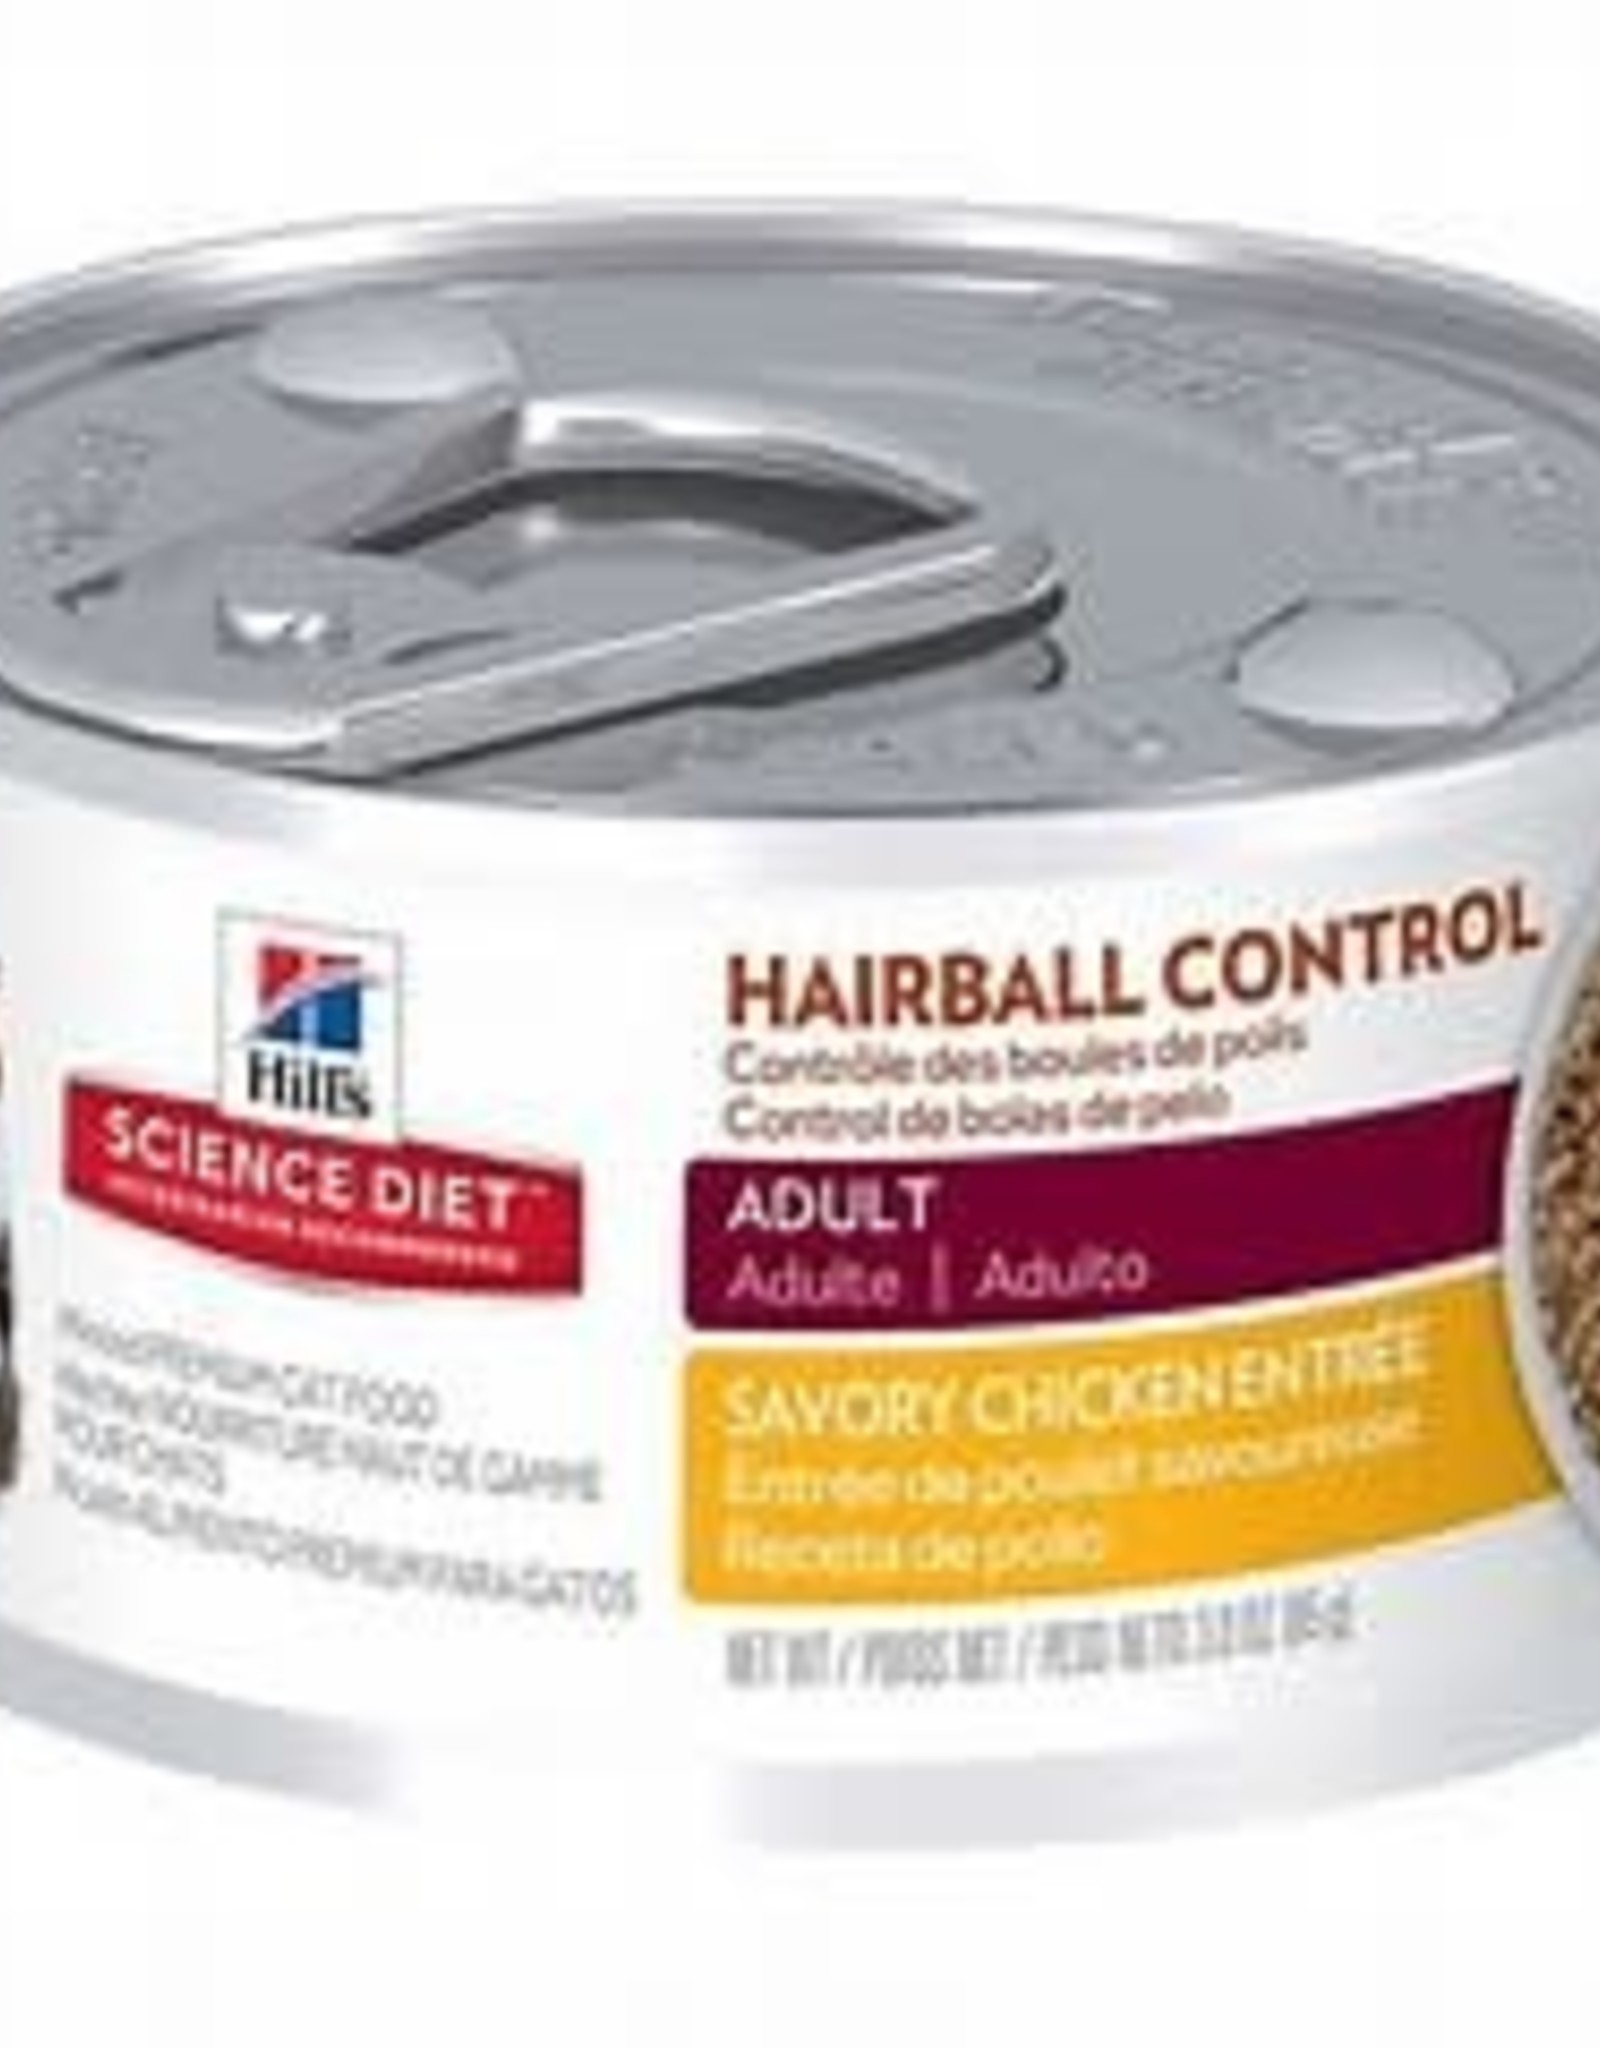 Hill's Science Pet Science Diet Cat Food, Premium, Hairball Control, Adult 1-6, Minced, Savory (10799)